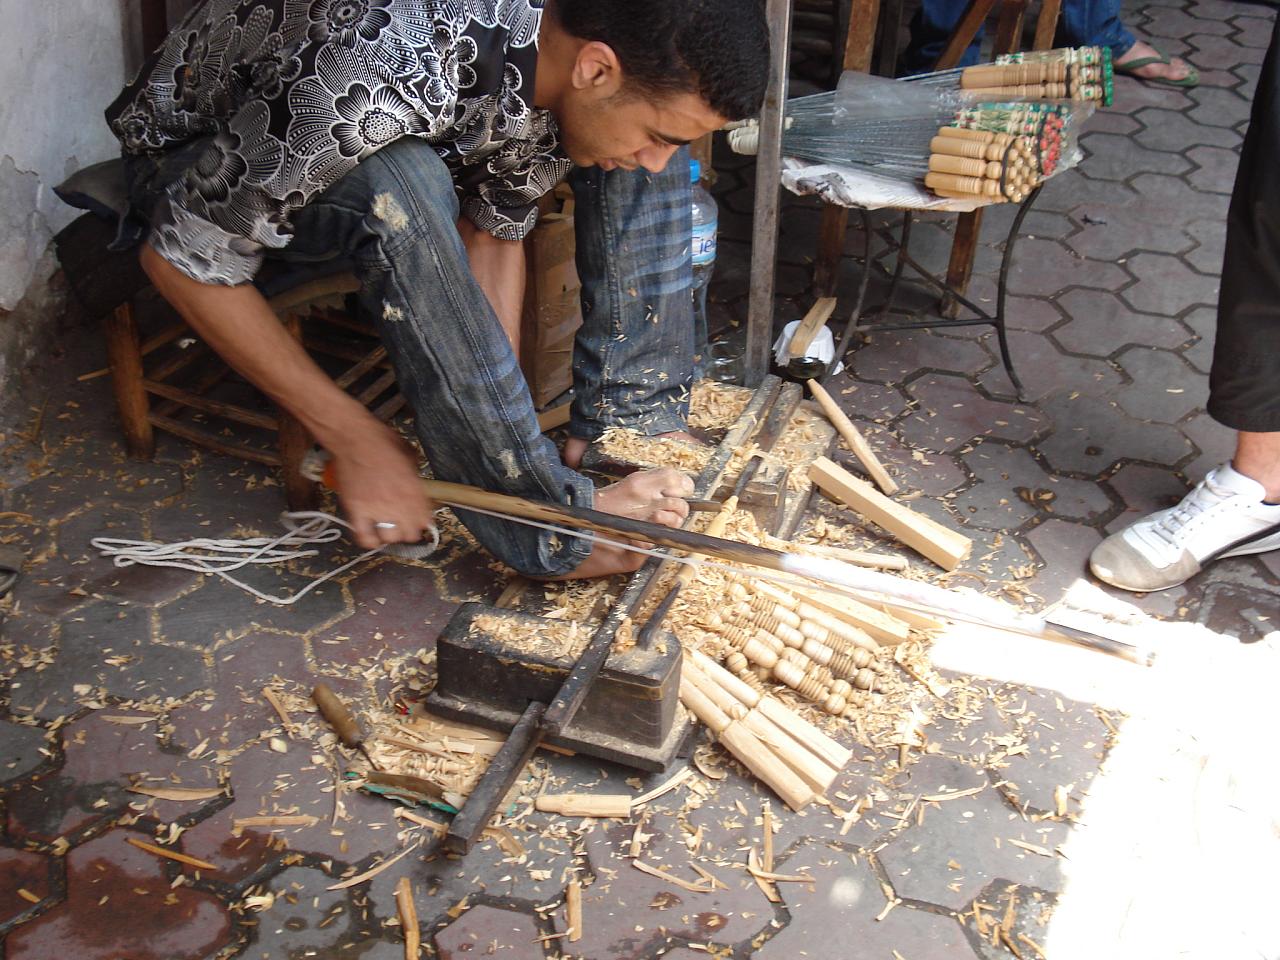 the man is making soing out of wood